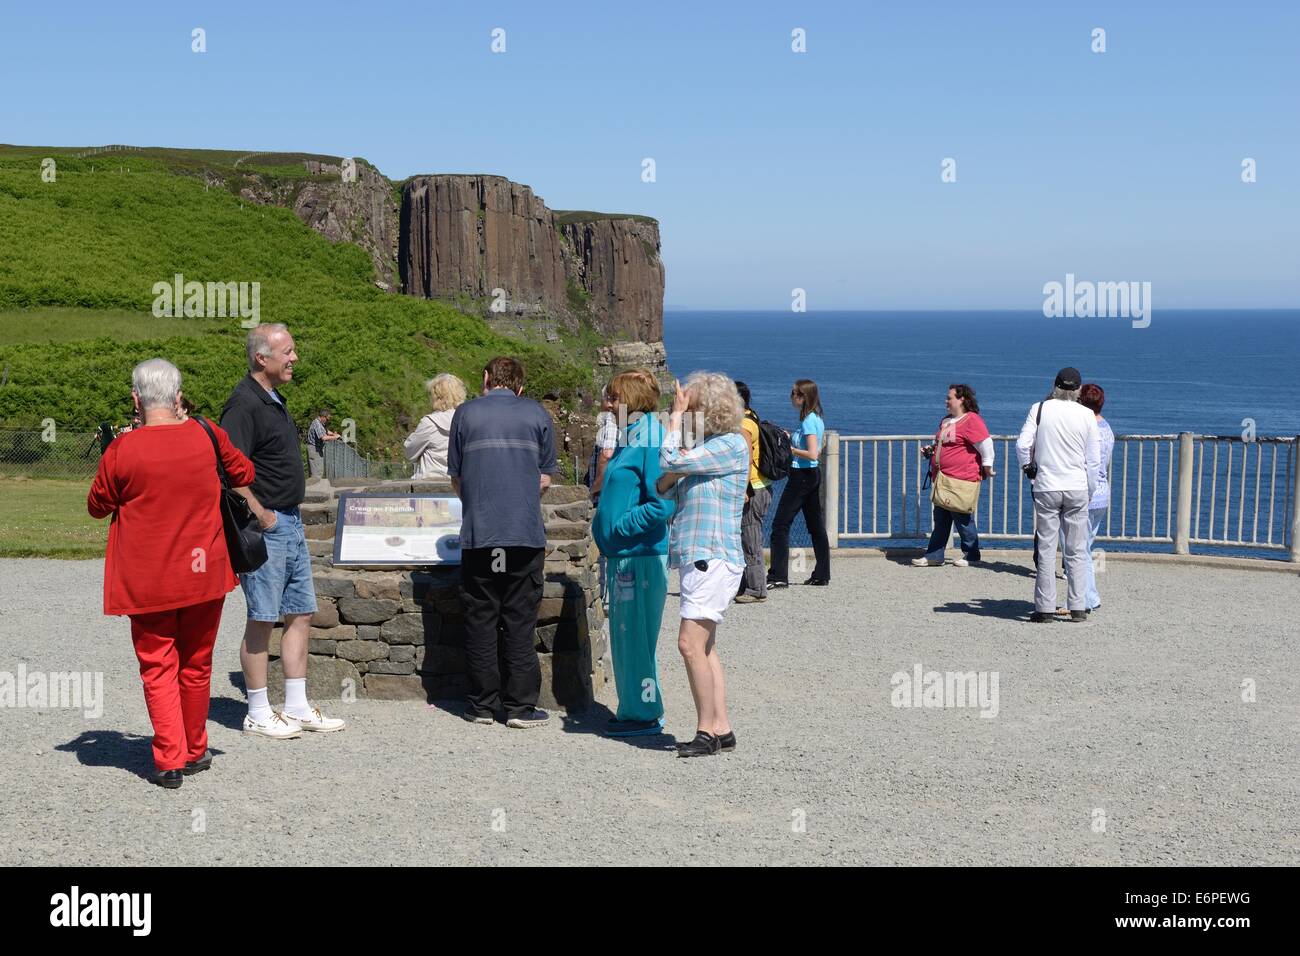 Tourists stop to take in the view at the kilt rock on the Isle of Skye, Scotland Stock Photo